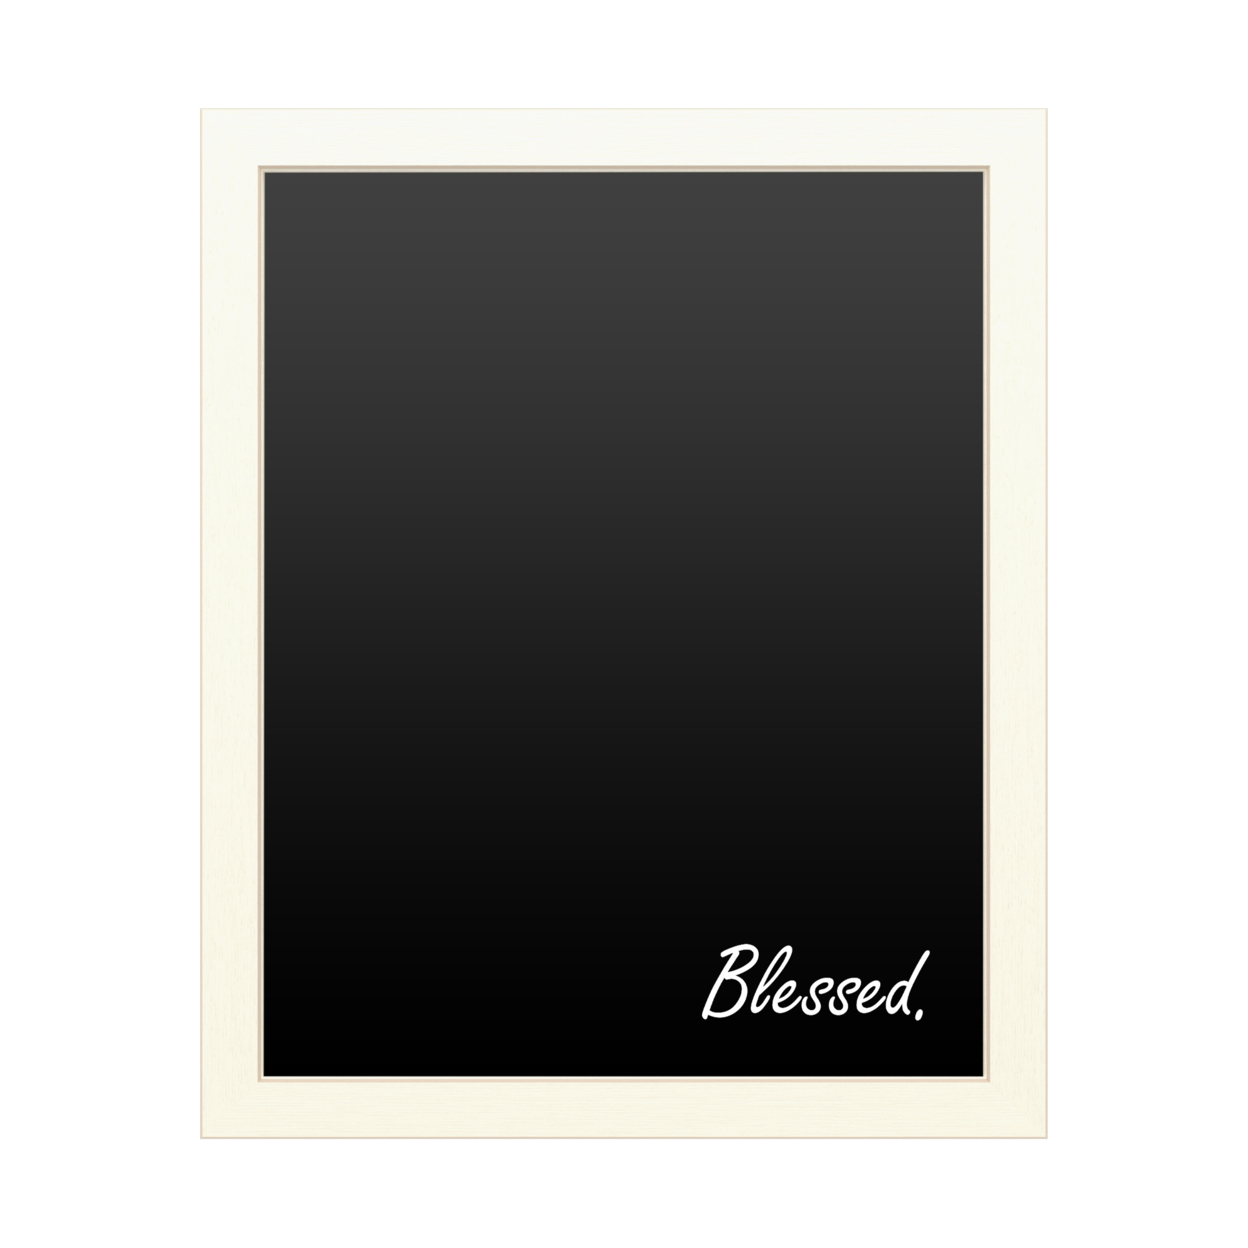 16 X 20 Chalk Board With Printed Artwork - Blessed Script White Board - Ready To Hang Chalkboard